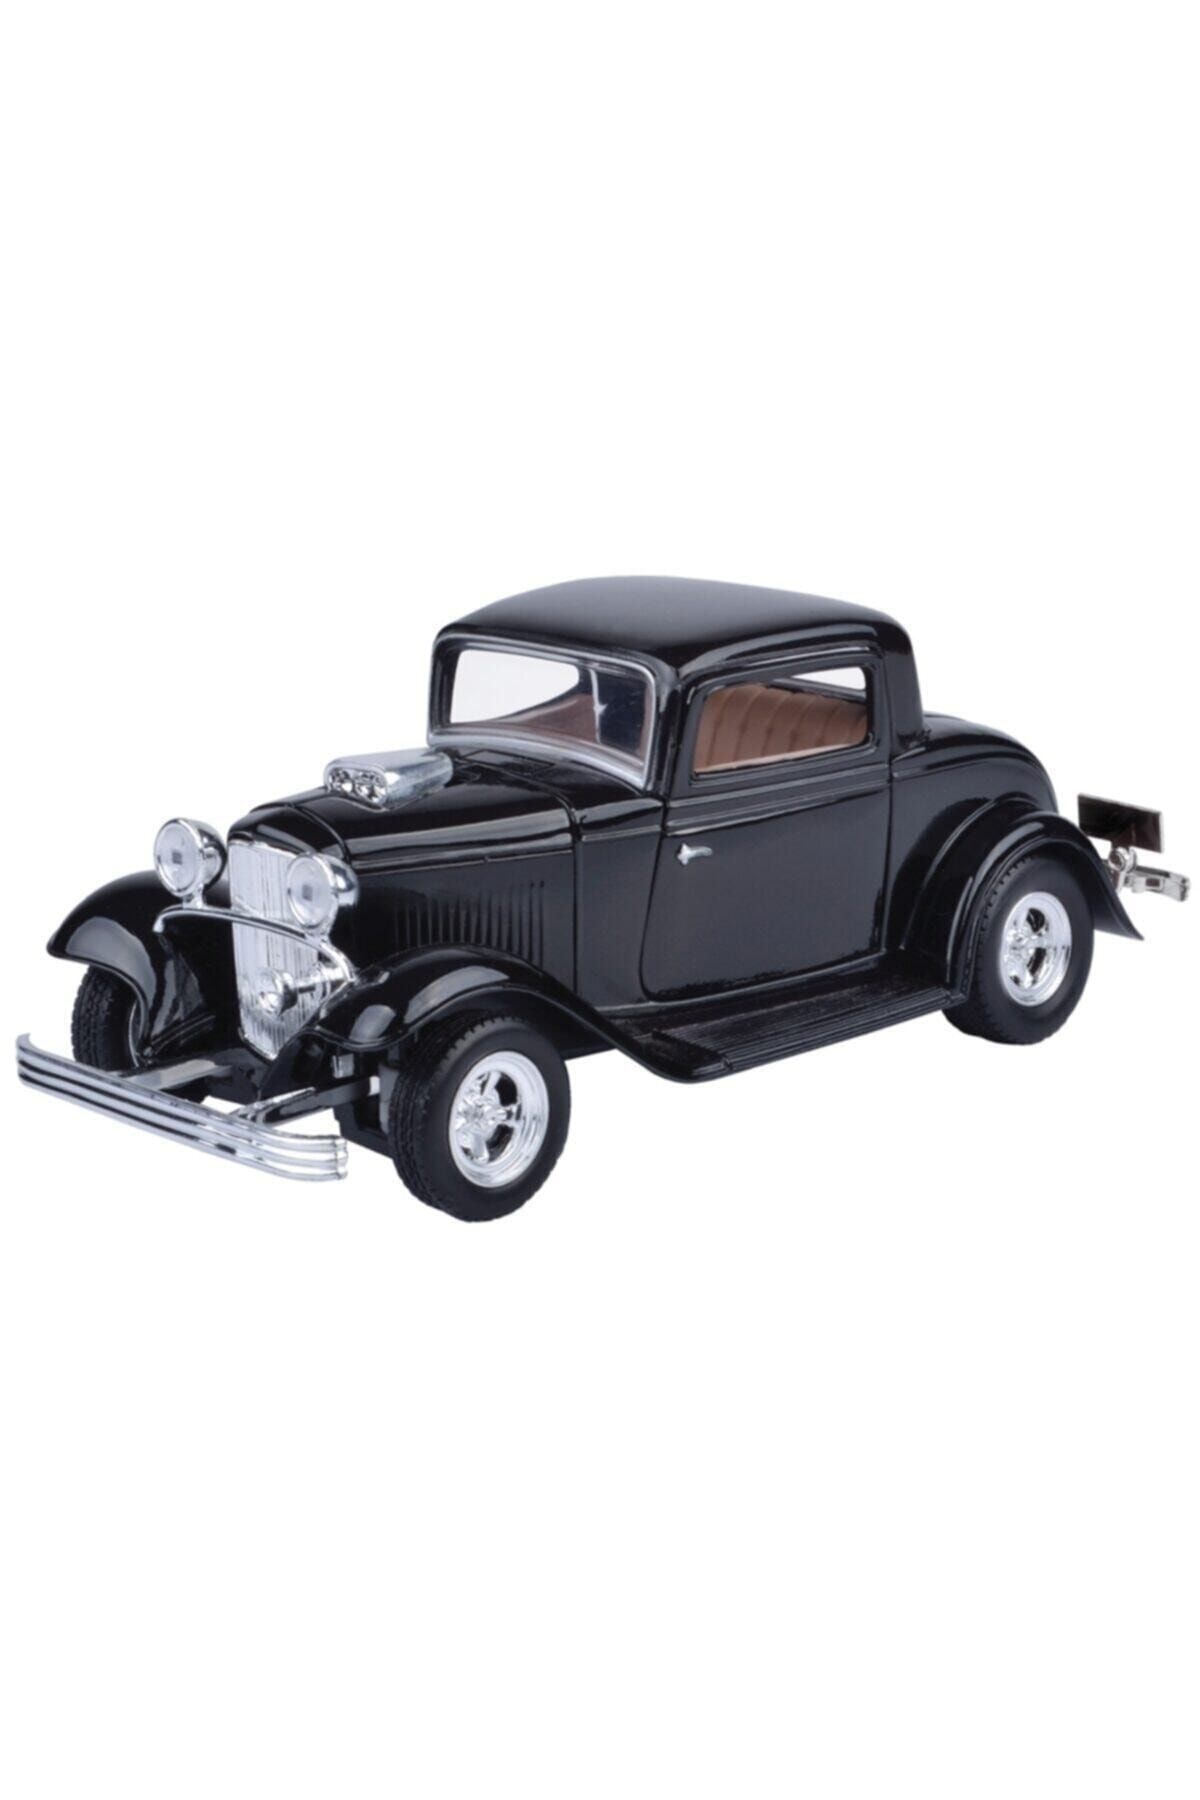 Motor Max Motormax 1:24 1932 Ford Coupe (مشکی) 73251